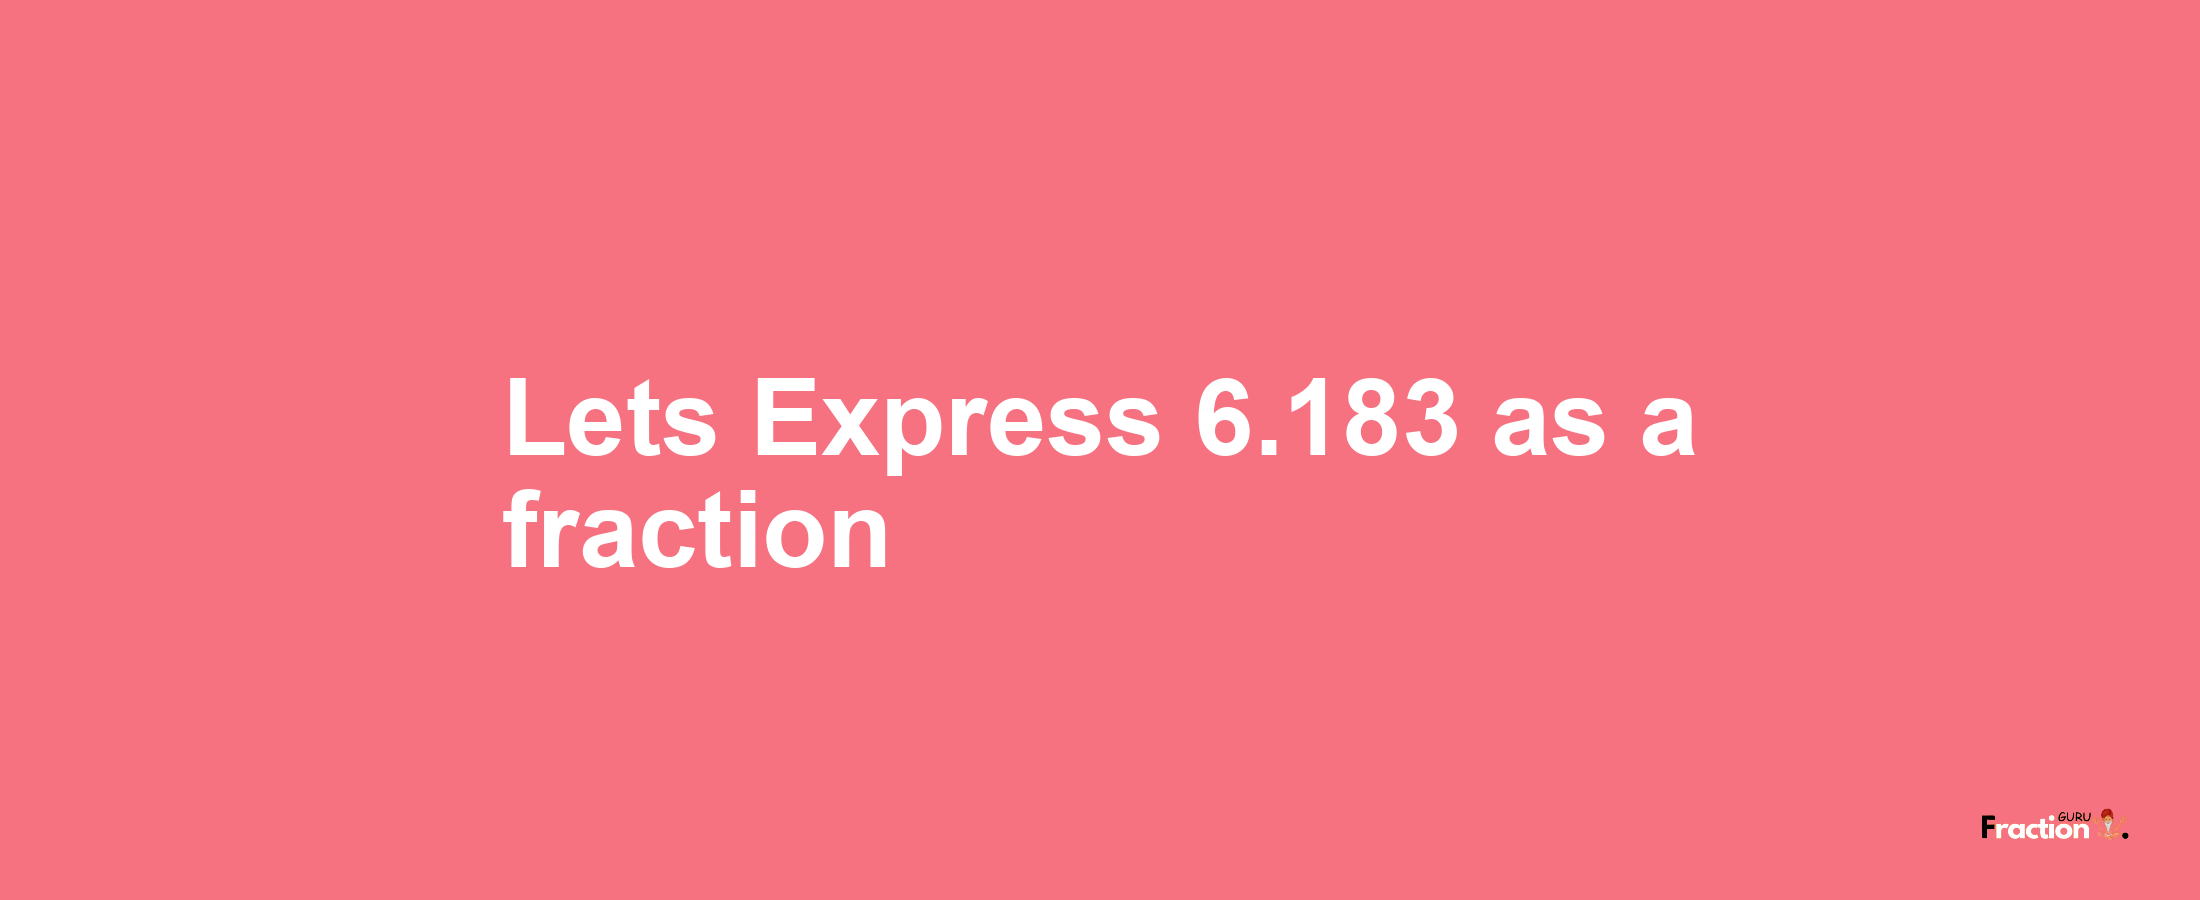 Lets Express 6.183 as afraction